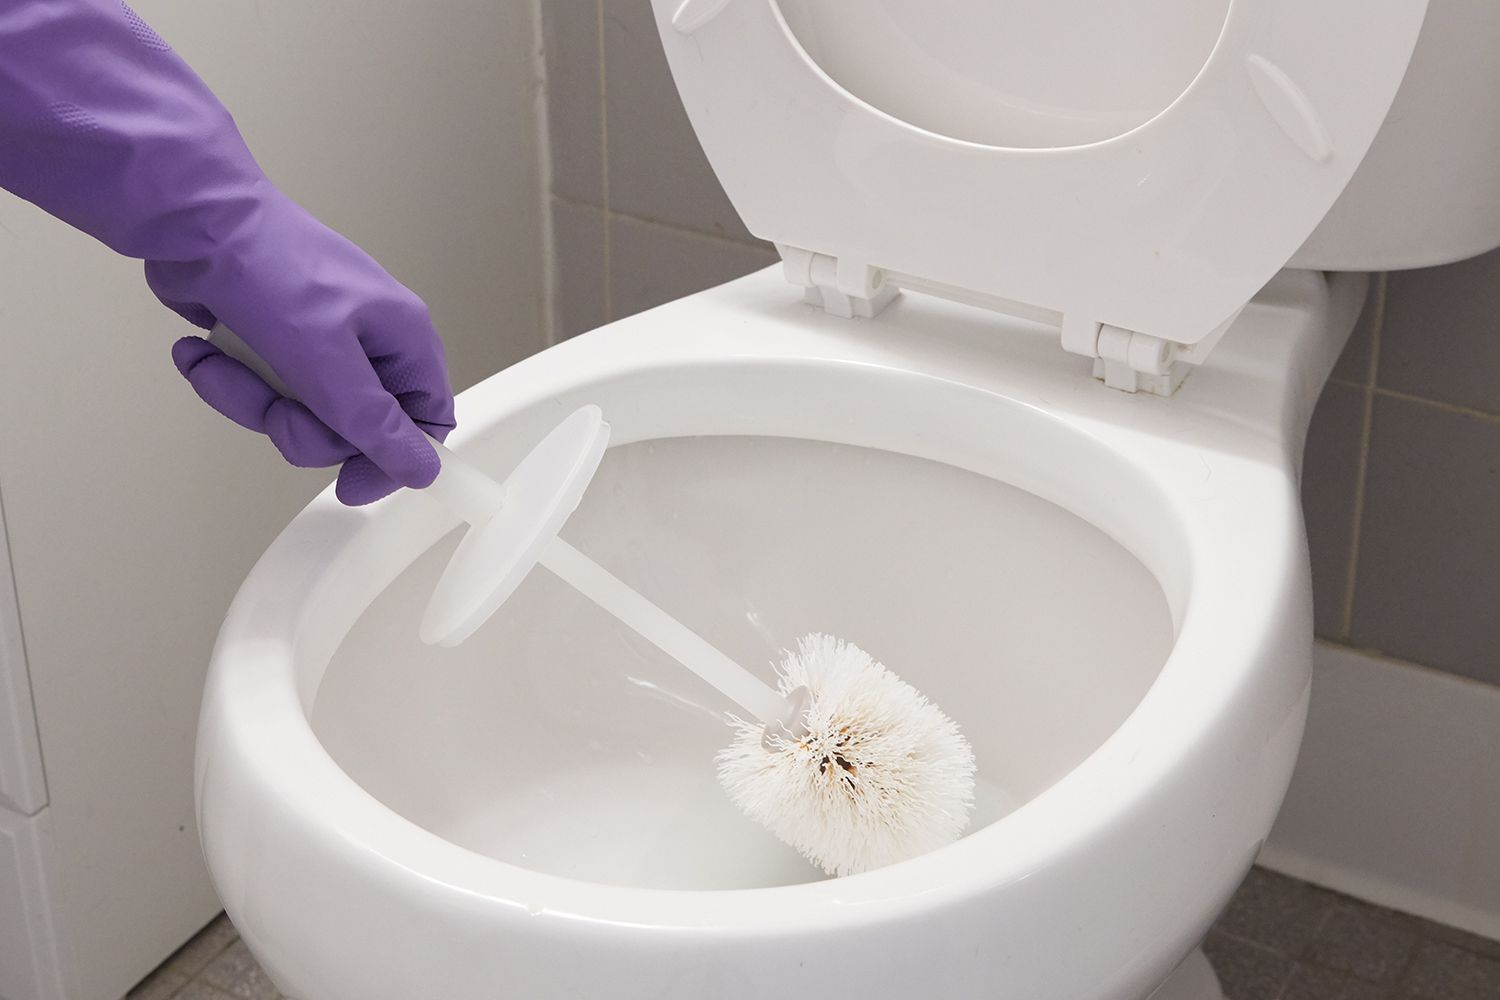 cleaning hard water stains out of the toilet